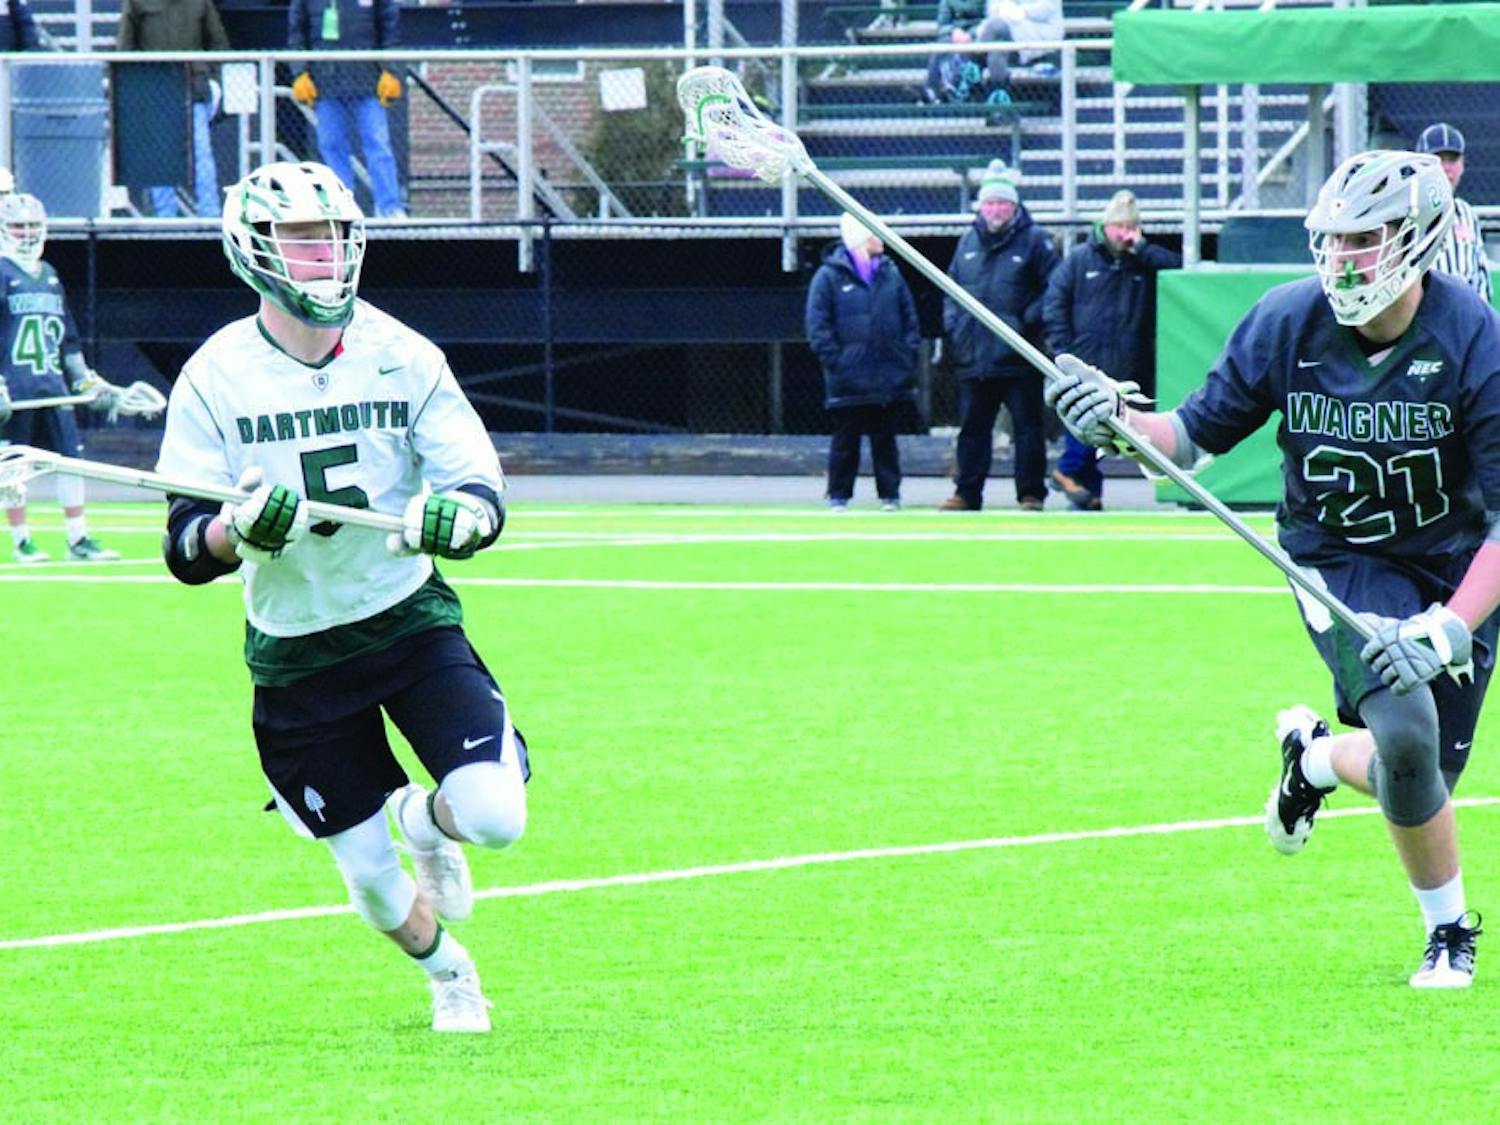 Ben Martin '20 put in four goals against Wagner University, including the go-ahead marker, and now leads the team with nine.